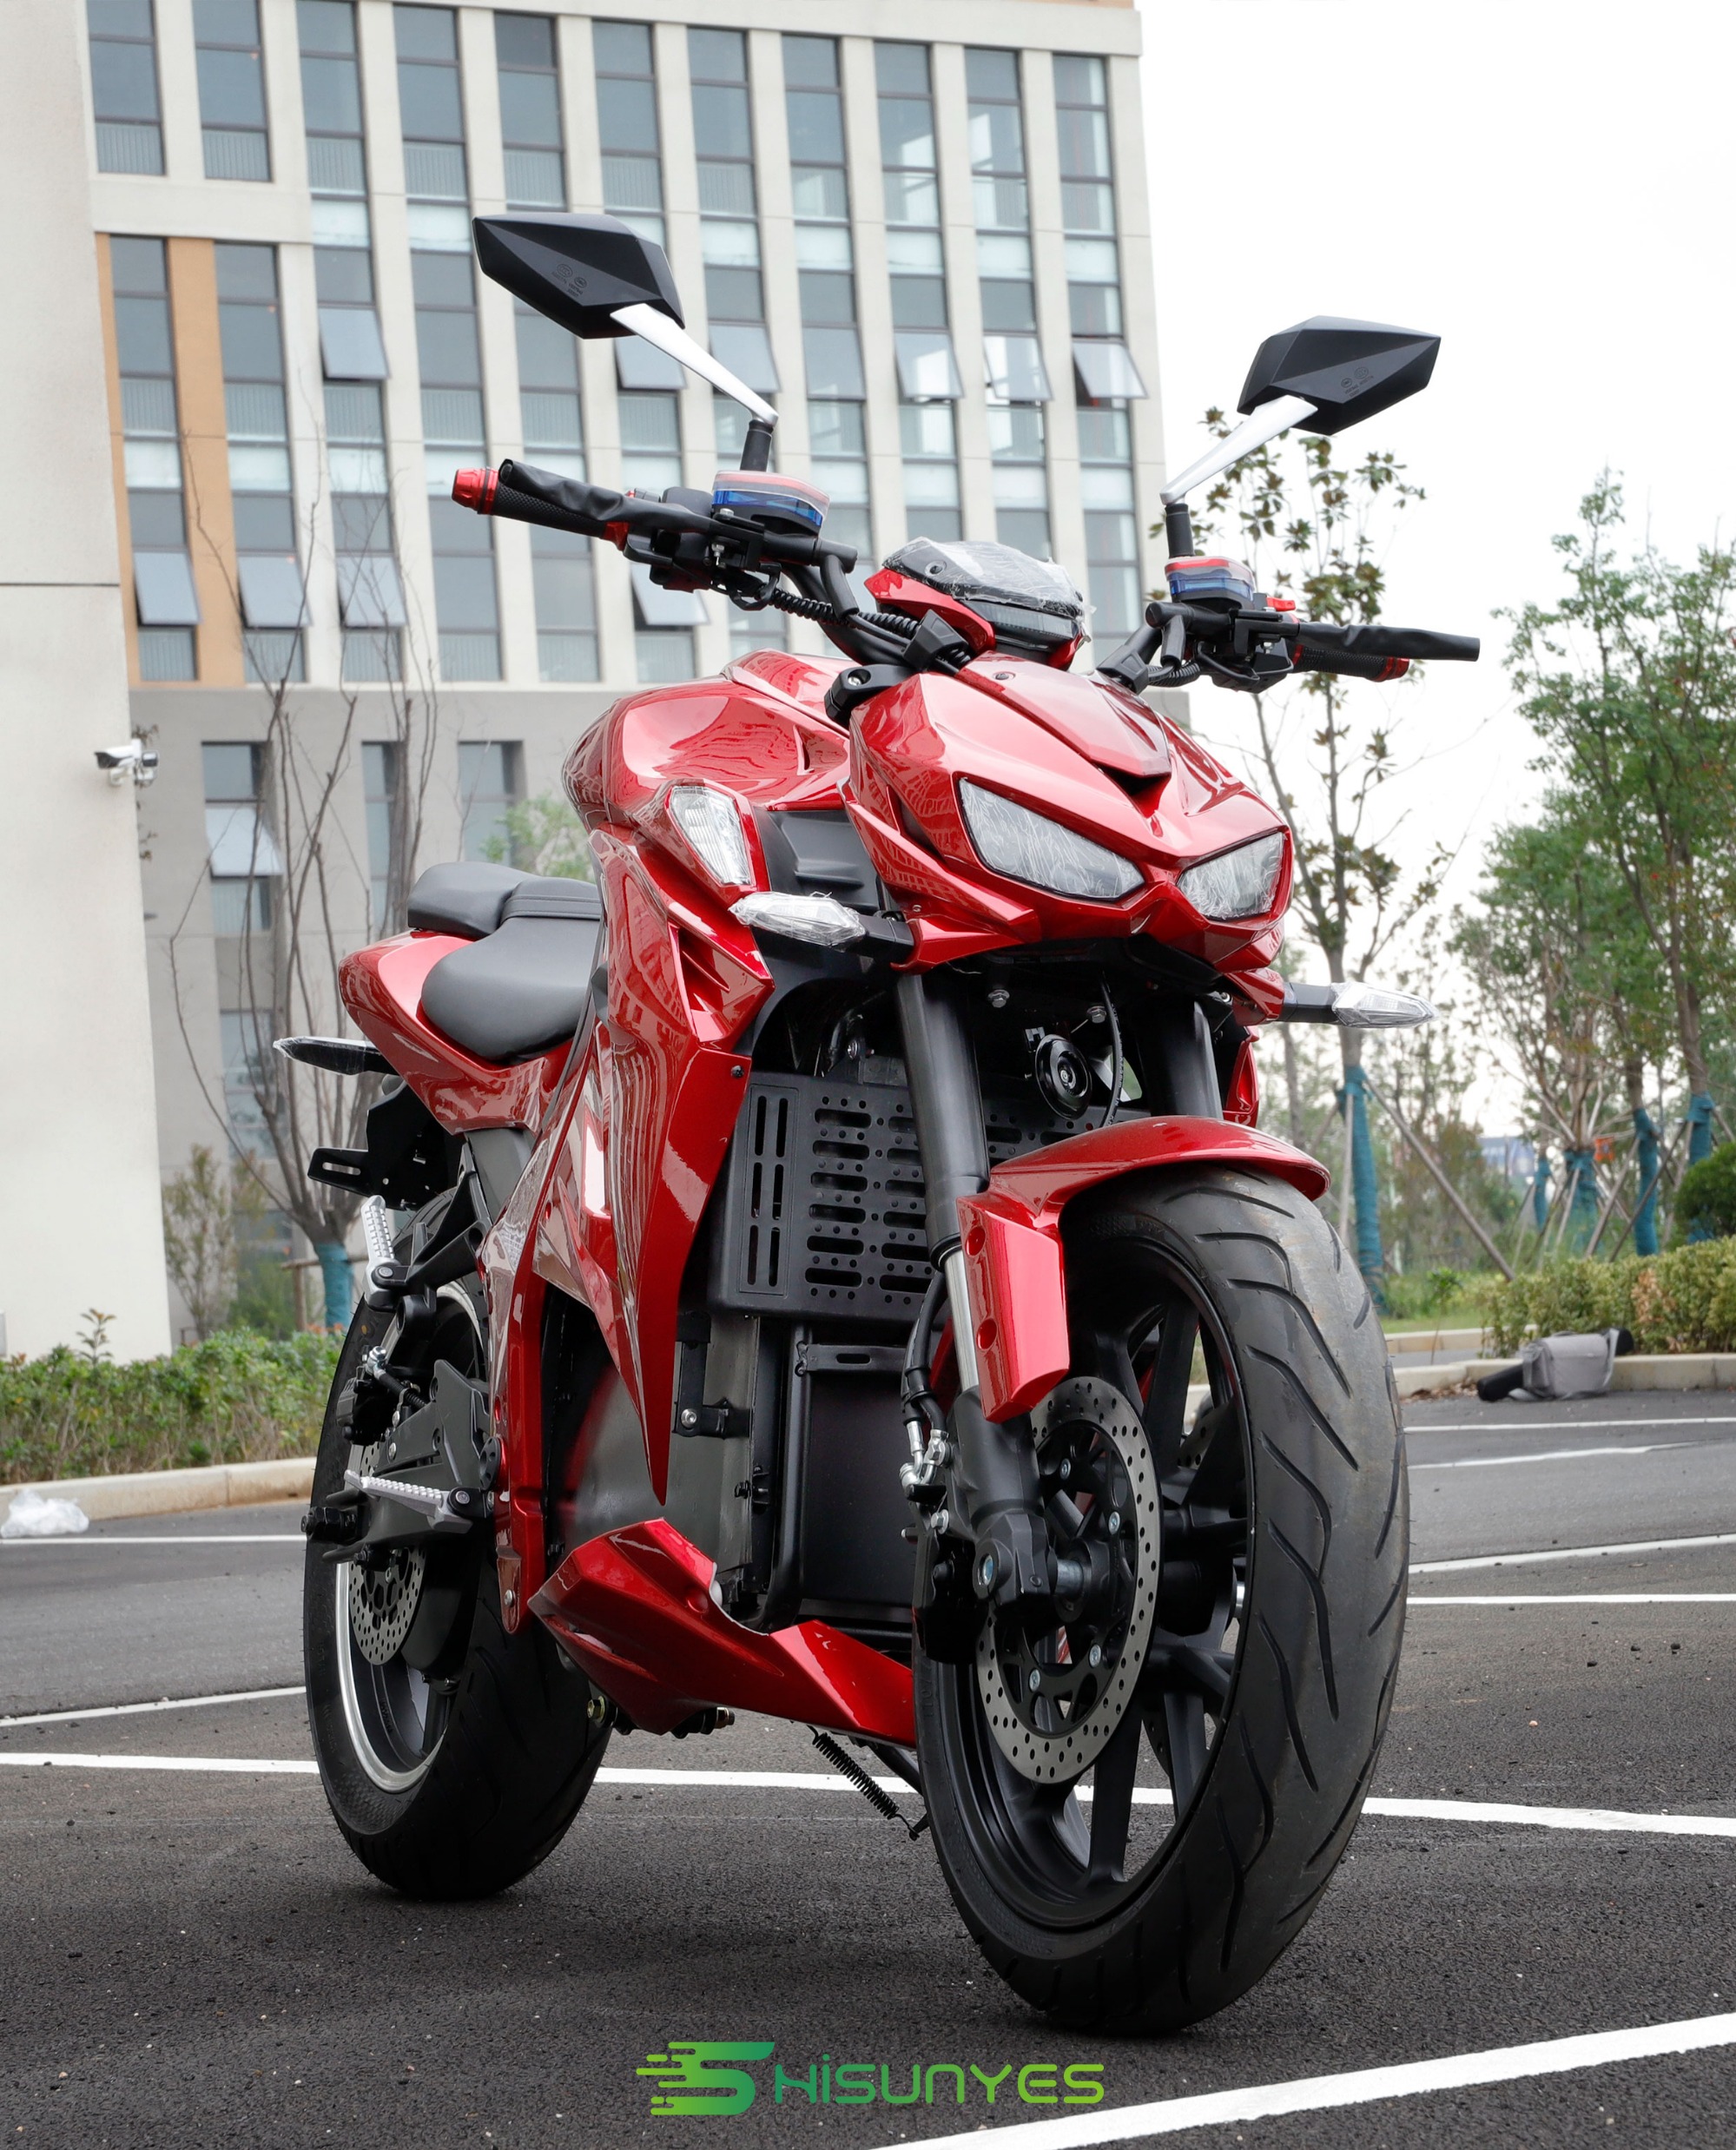 The red electric motorcycle V10